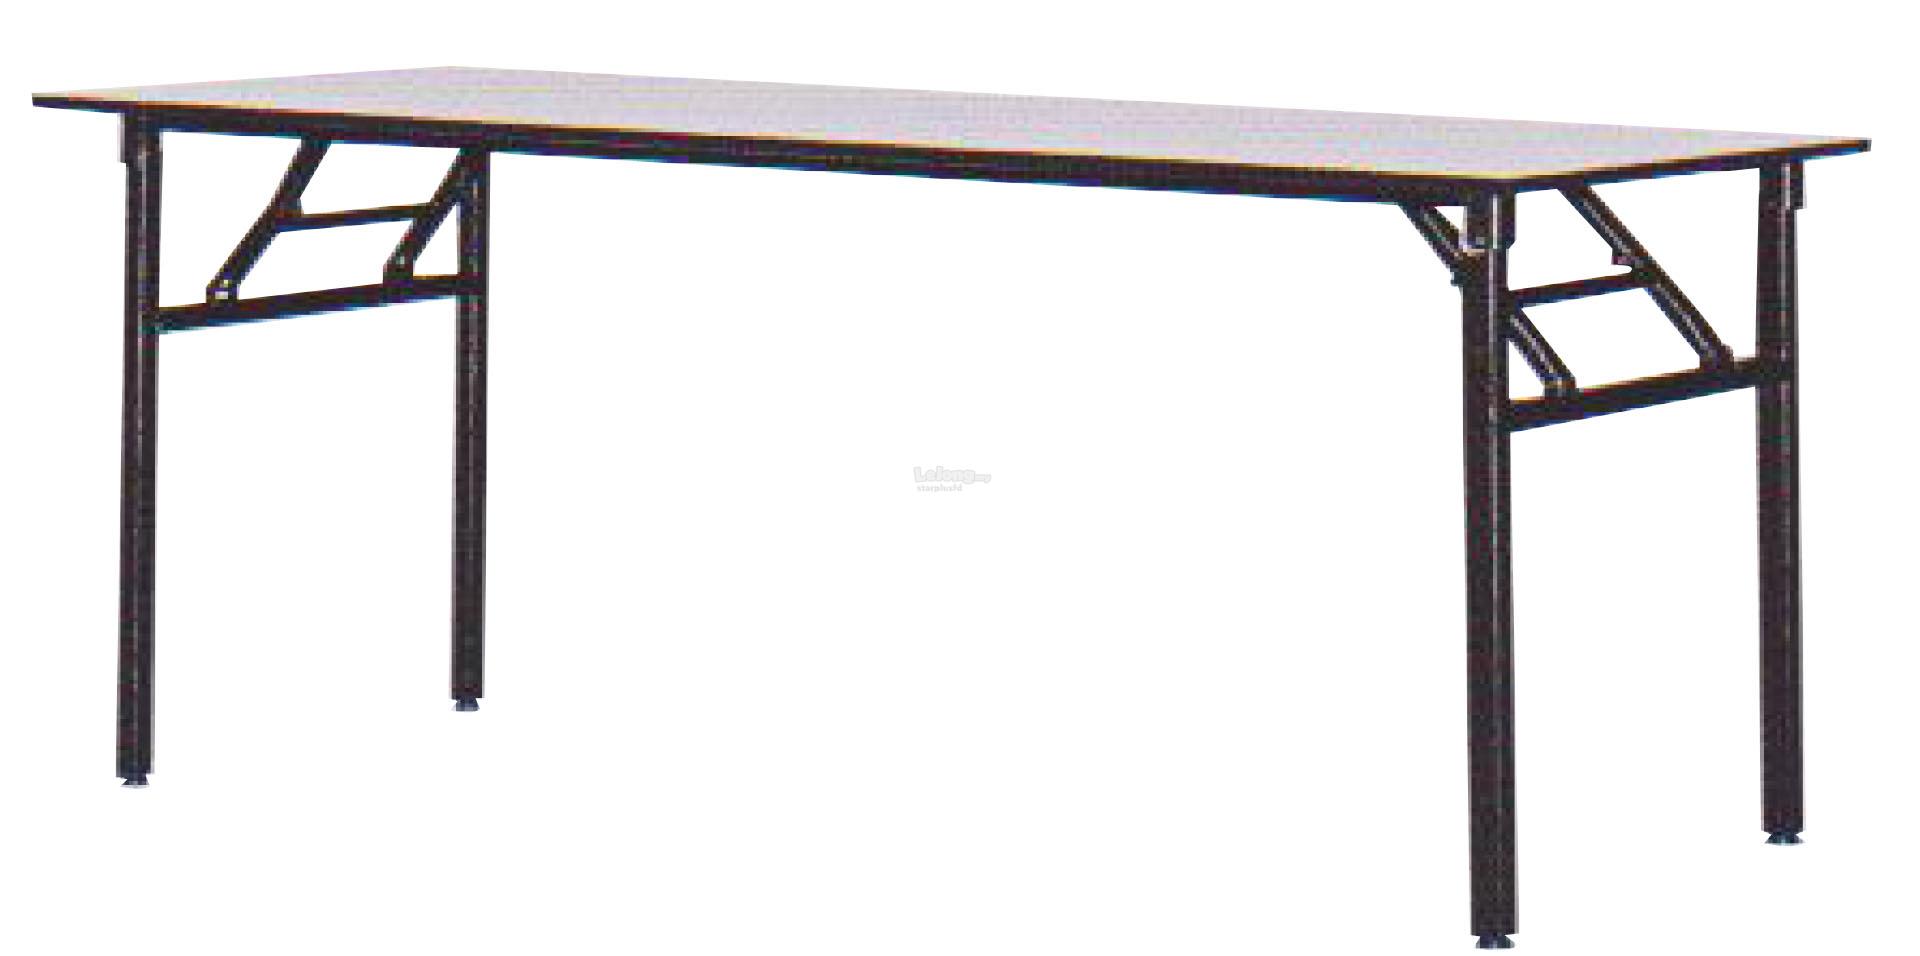 Folding Table / Banquet Table 1800mm(W) x 750mm(D) x 760mm(H)